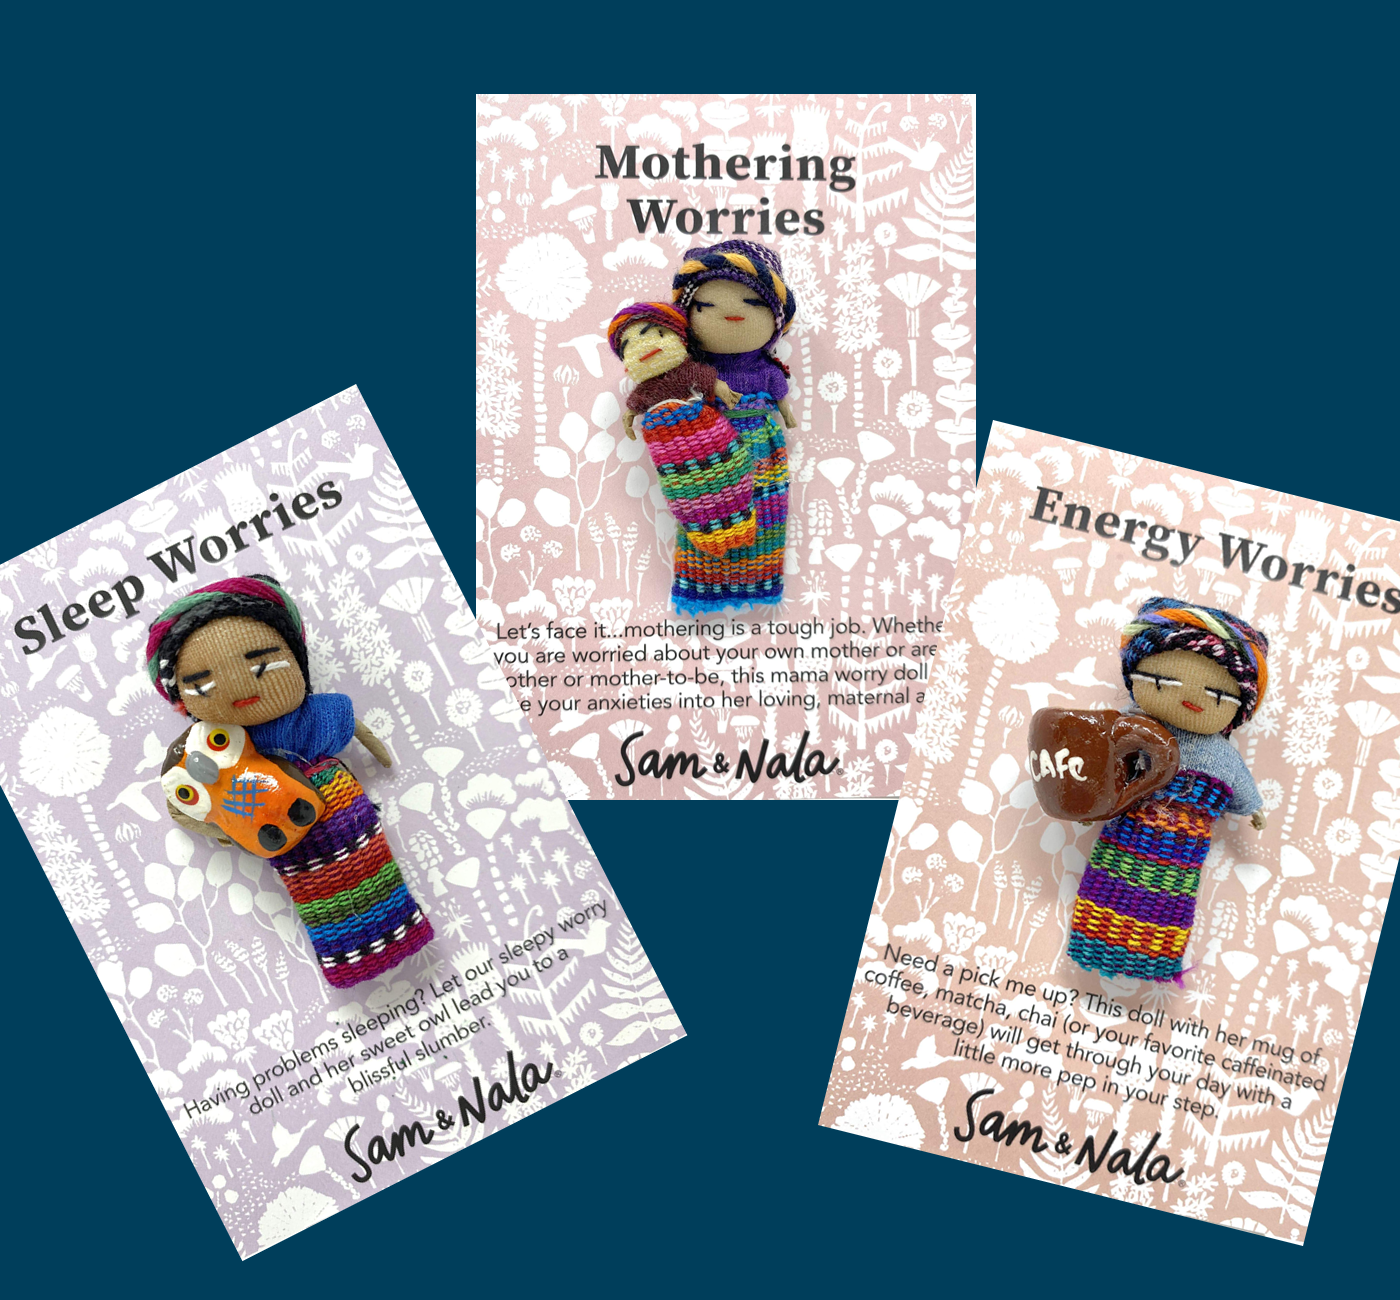 3 Mom Pack- includes 1 each of